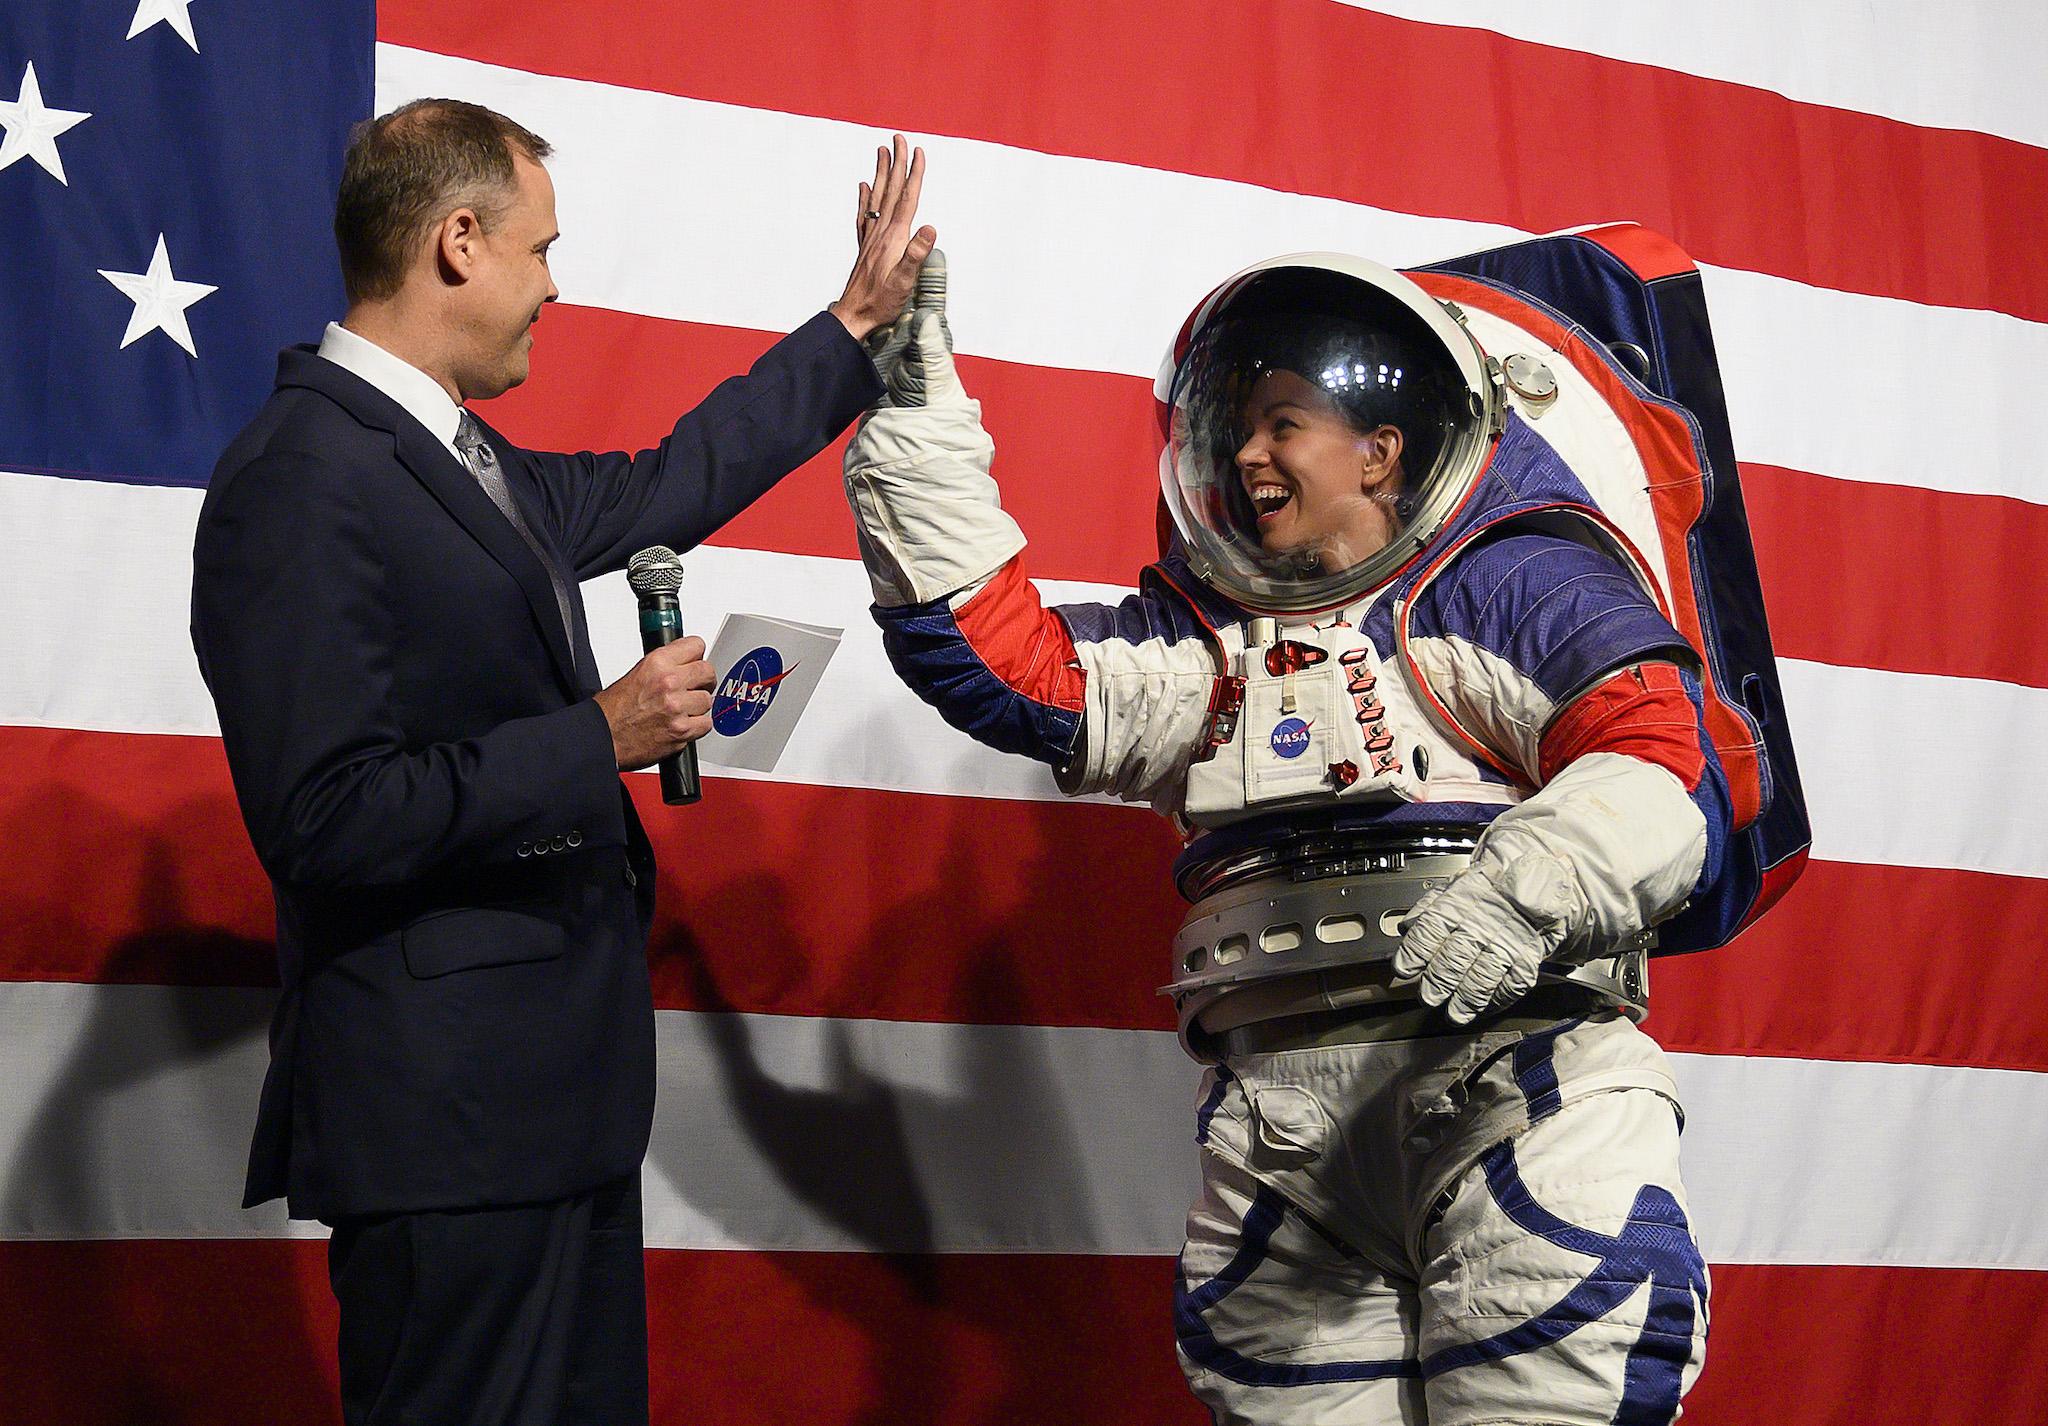 NASA administrator Jim Bridenstine (L) welcomes Advance space suit engineer, Kristine Davis (R), to the stage during a press conference displaying the next generation of space suits as parts of the Artemis program in Washington, DC on October 15, 2019